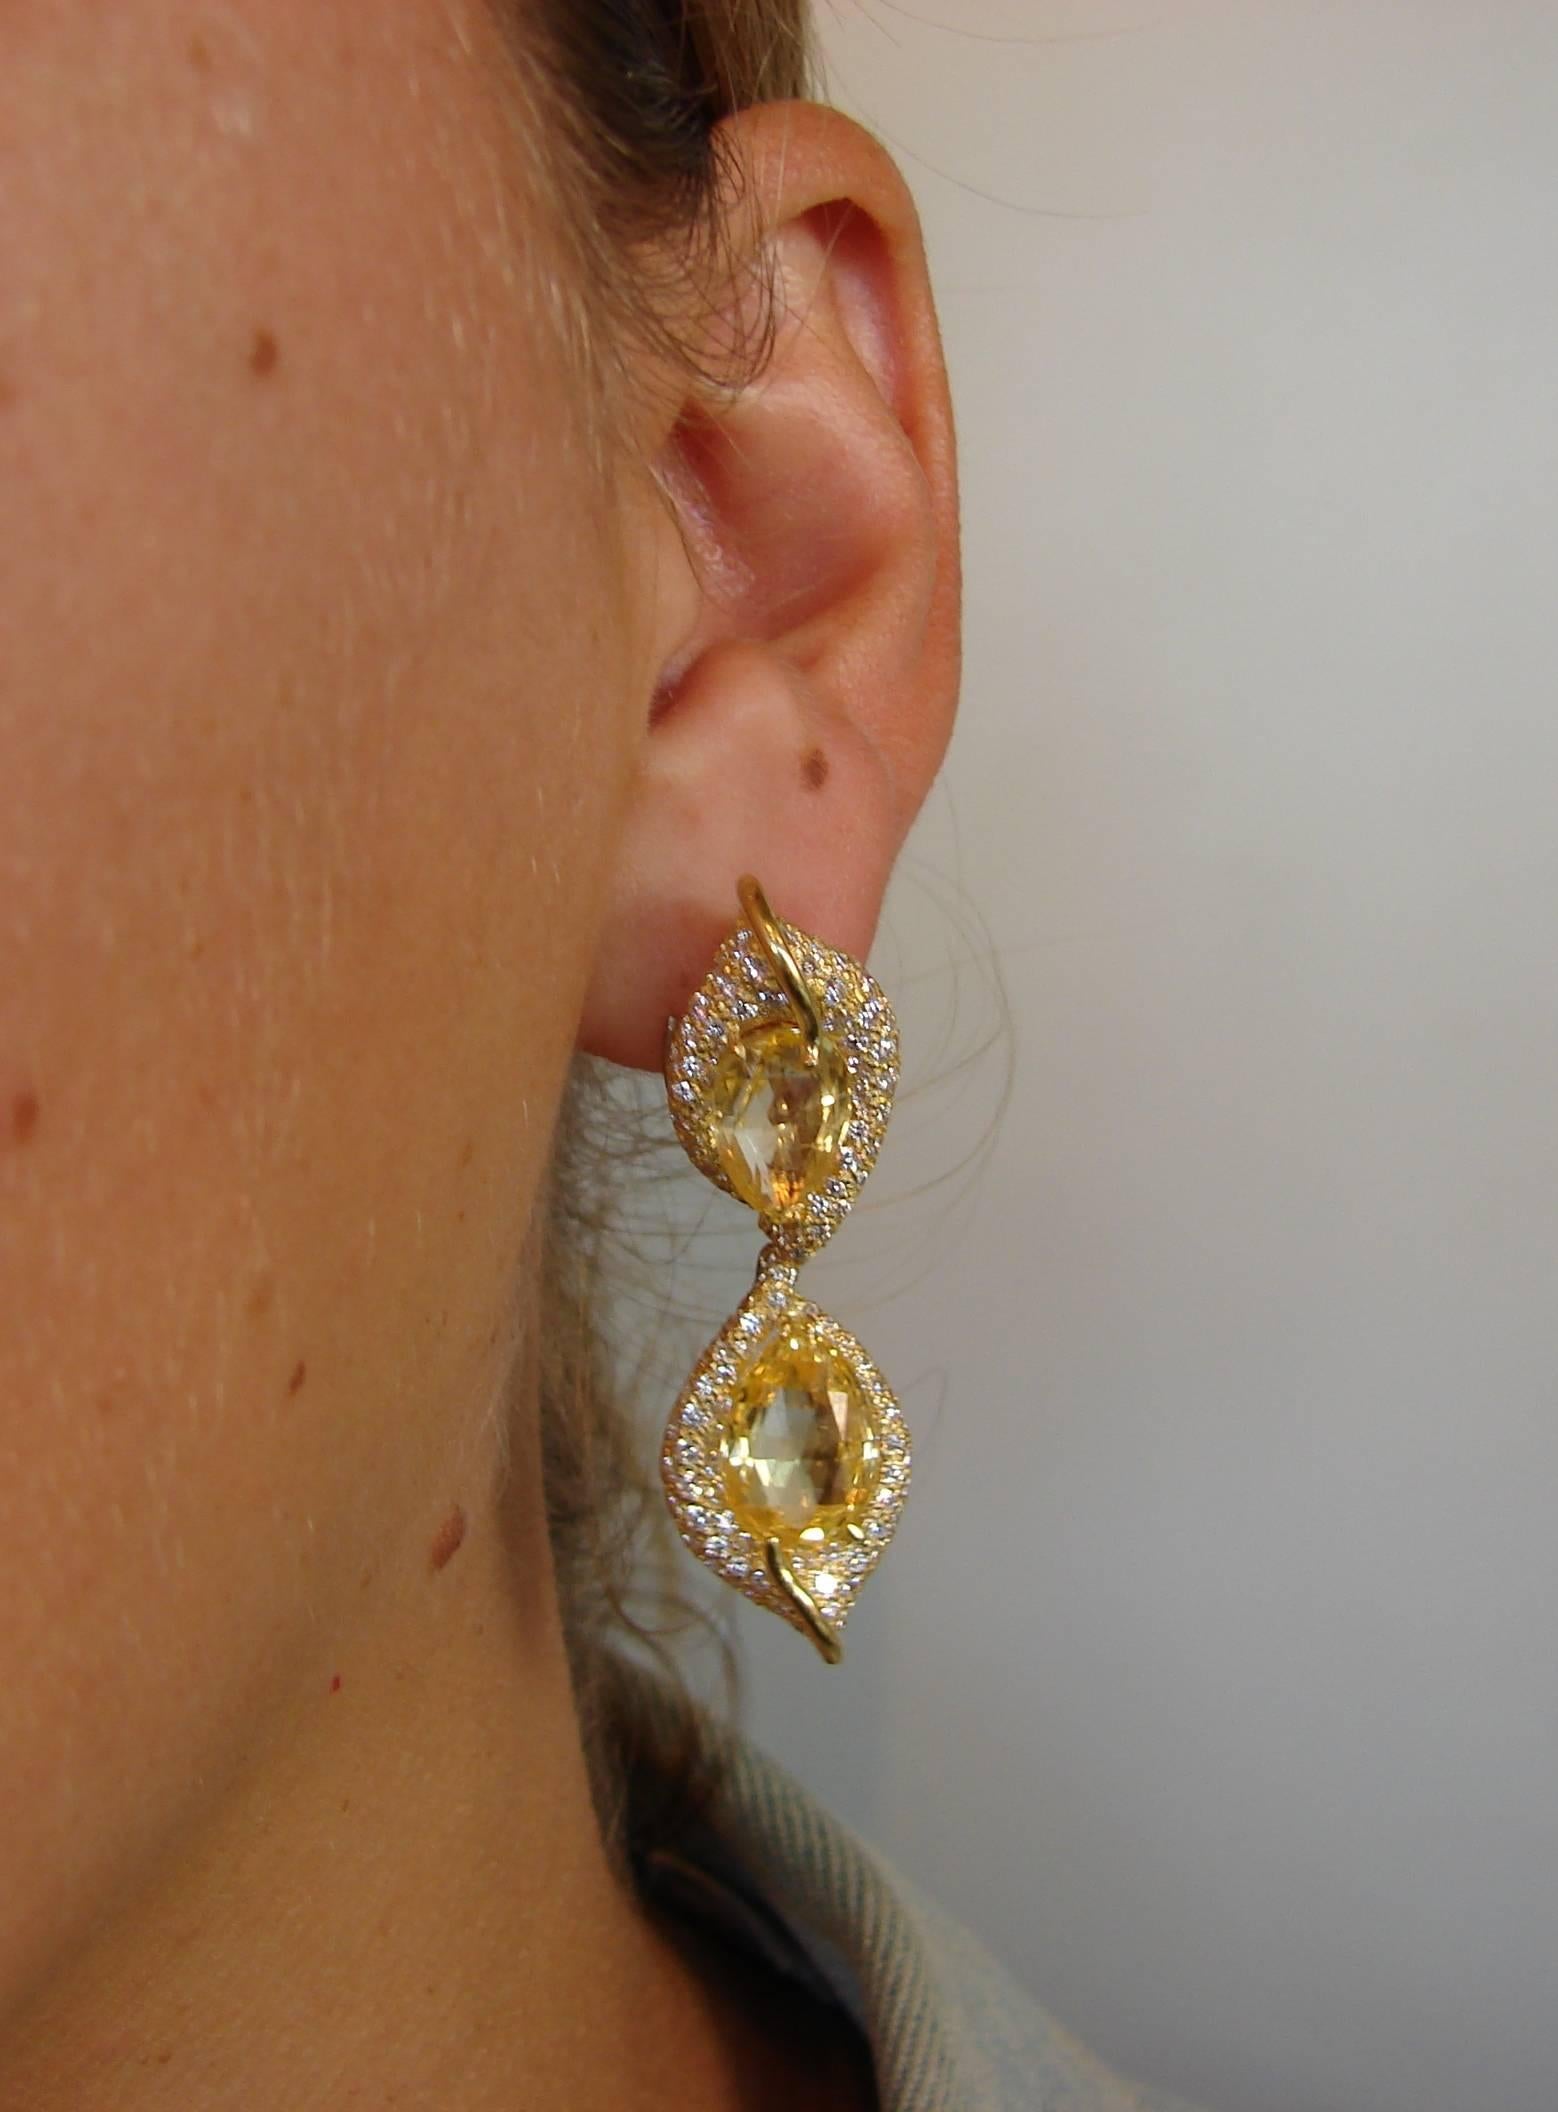 A pair of gorgeous earrings created by Henry Dunay in the 1980's. 
Made of 18 karat (stamped) yellow gold and feature four briolette cut yellow sapphires accented with round brilliant cut diamonds. The yellow sapphires total weight is approximately